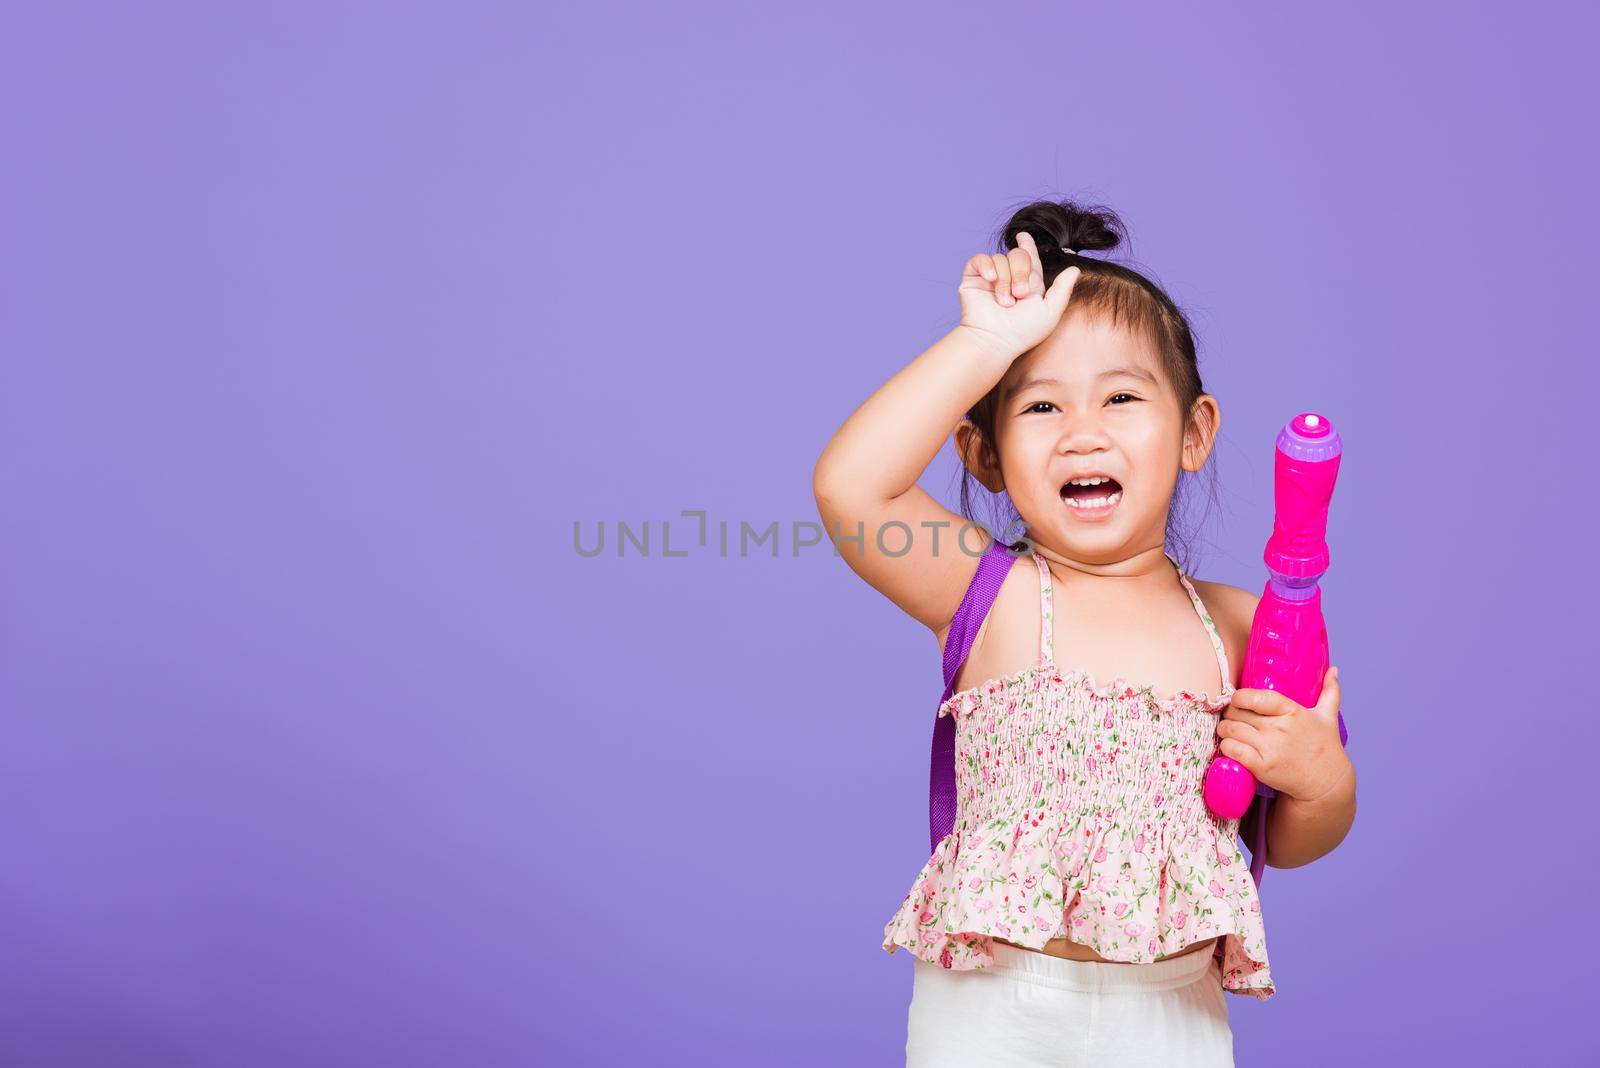 Happy Asian little girl holding plastic water gun, Thai child funny hold toy water pistol and smile, studio shot isolated on purple background, Thailand Songkran festival day national culture concept